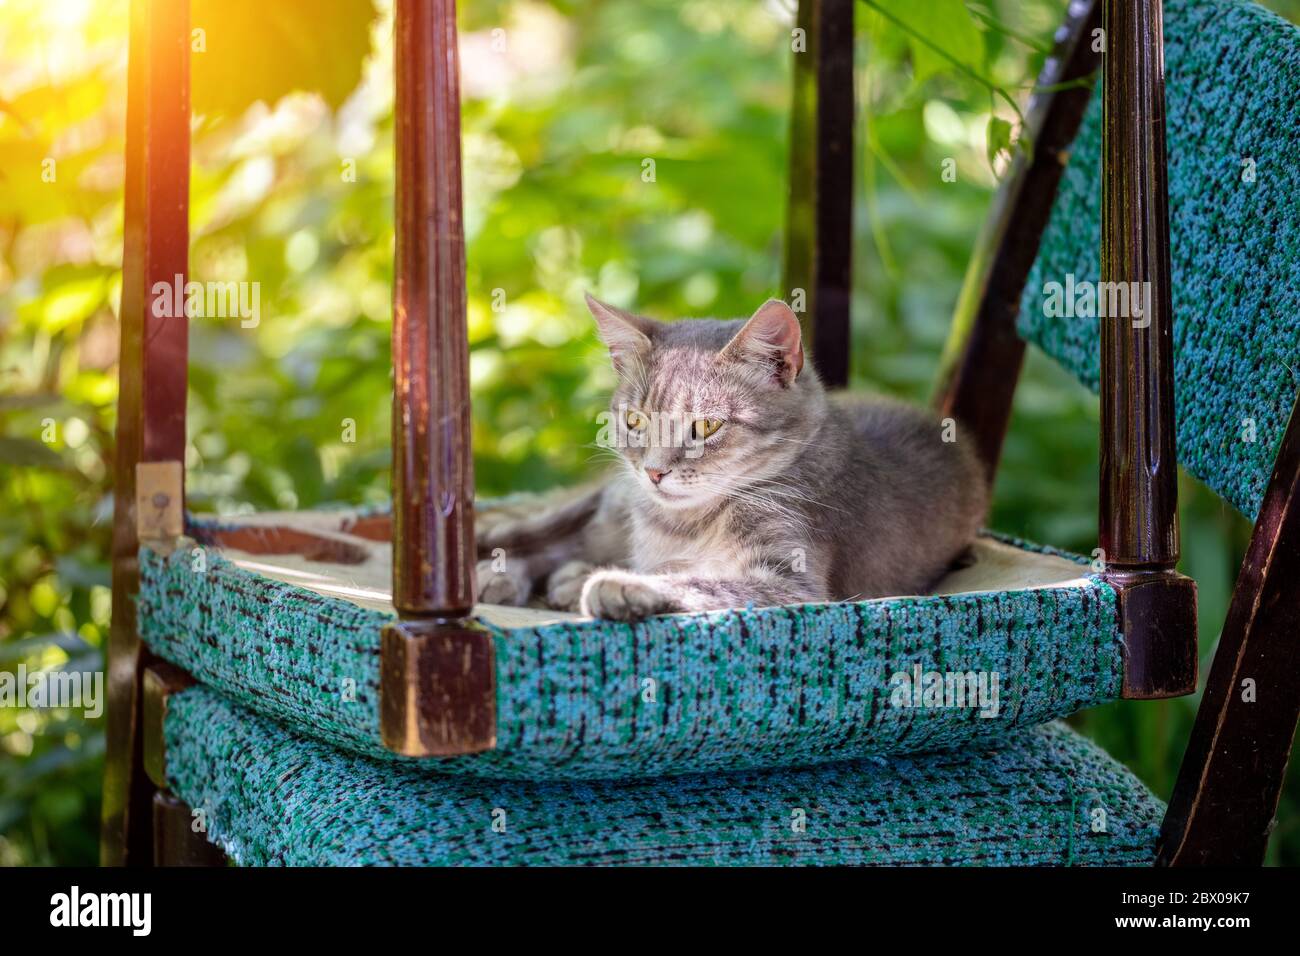 The cat was lying on an upside down chair in the garden Stock Photo